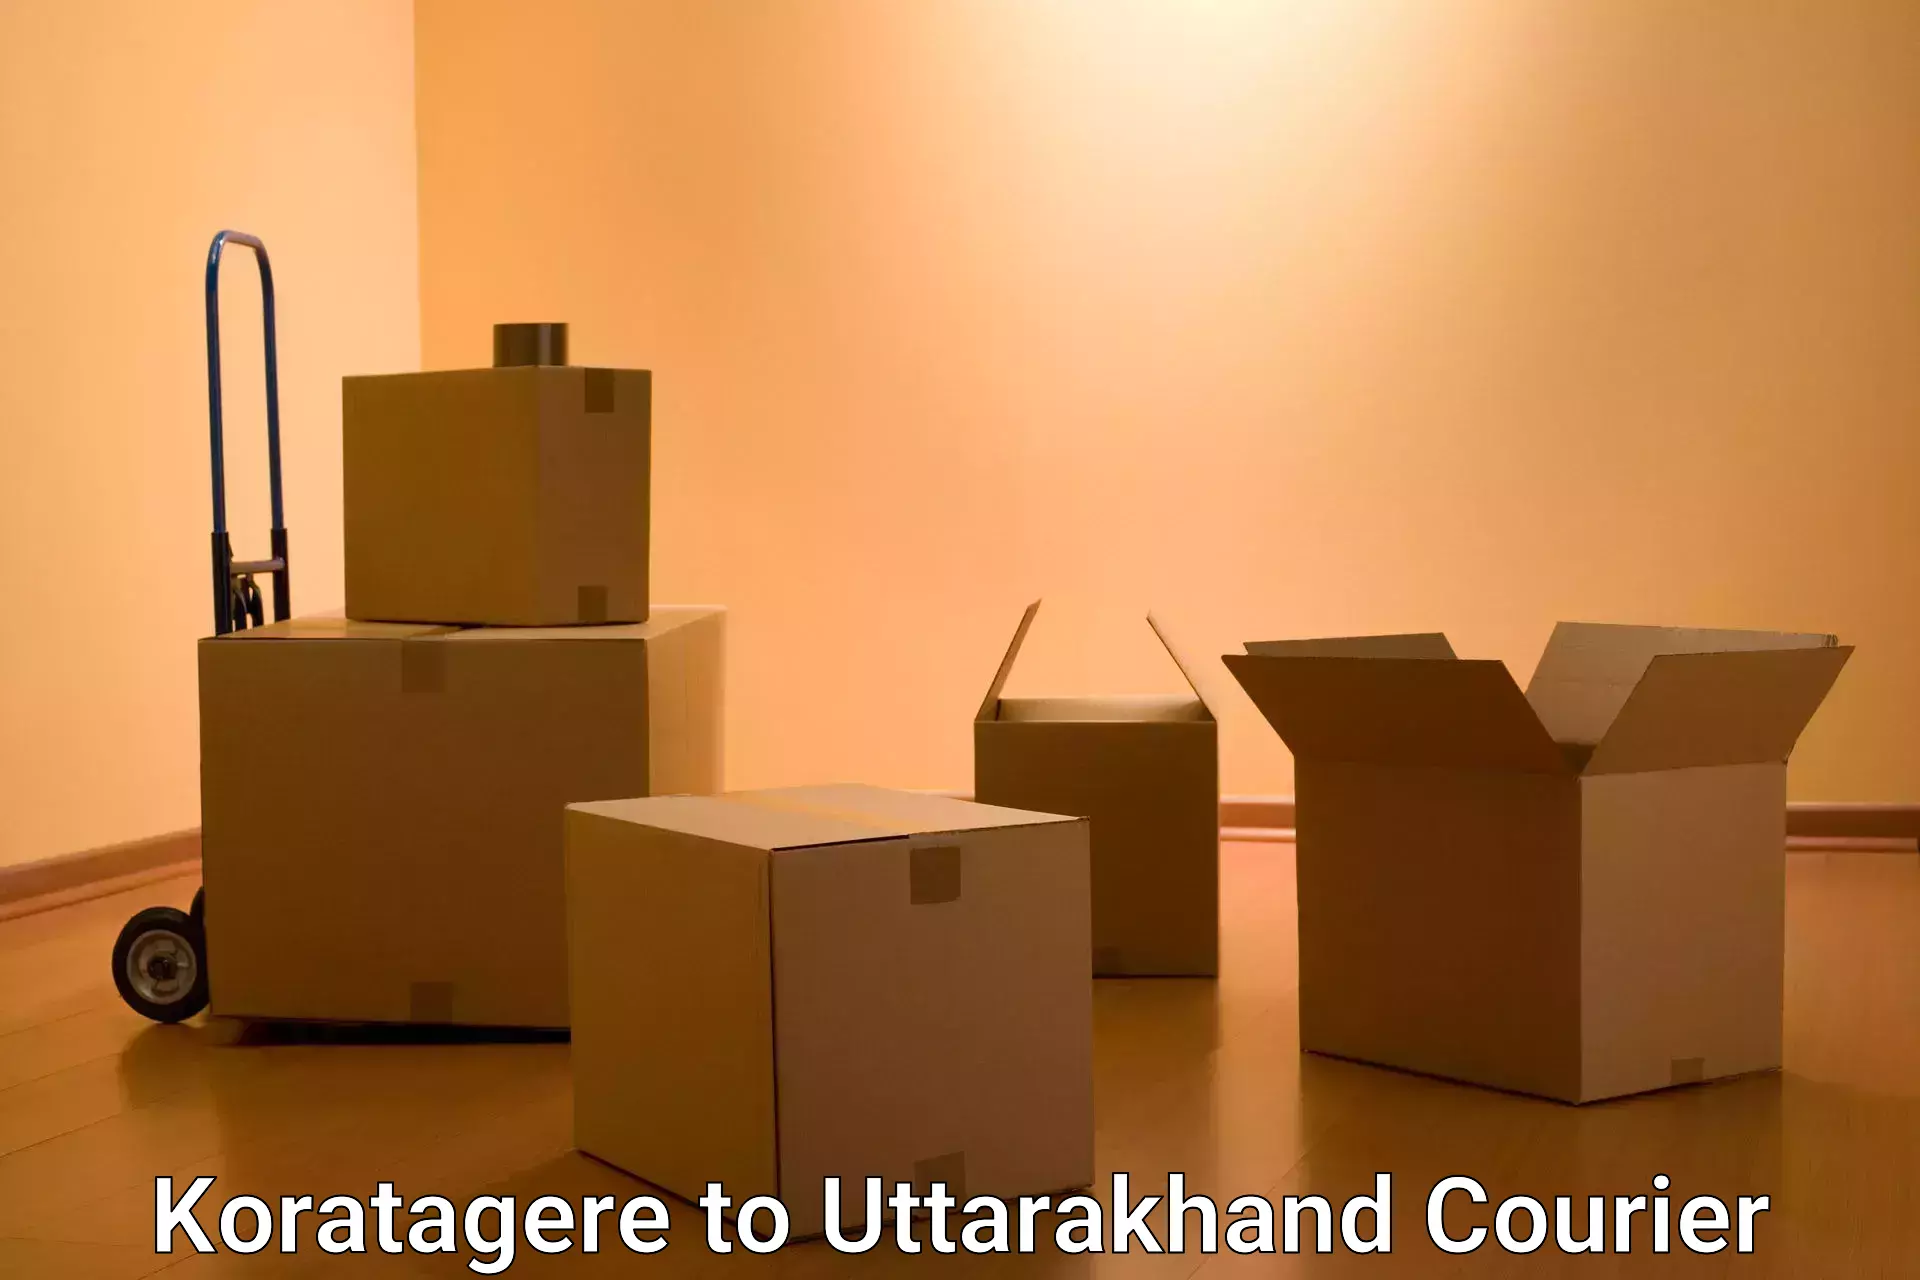 Full-service courier options Koratagere to Kashipur